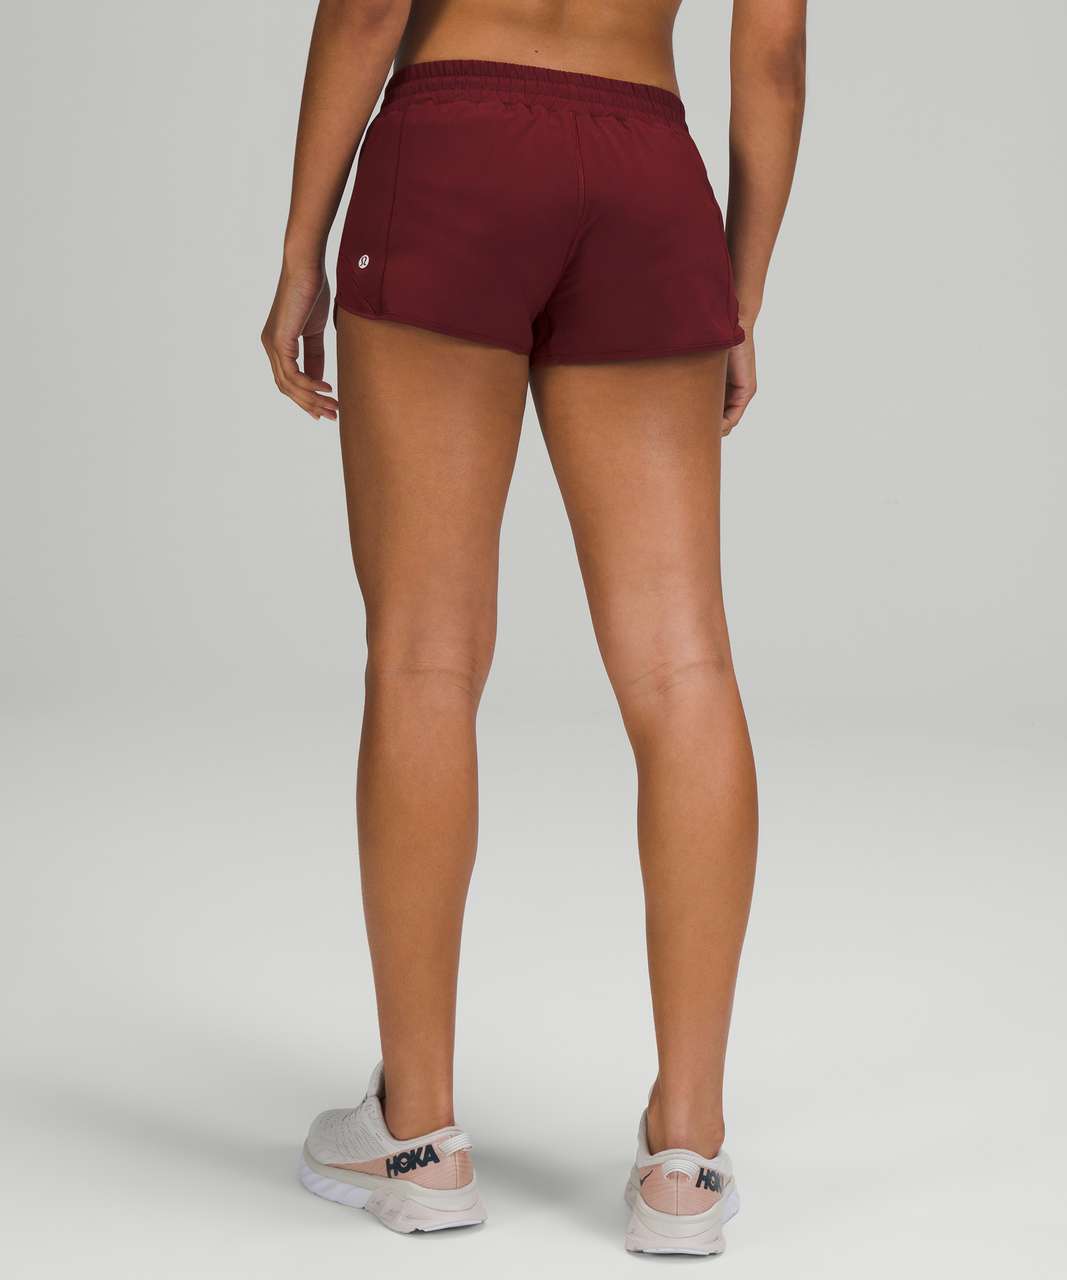 Canada Lululemon Shorts Outlet Store - Red Merlot Speed Up MR